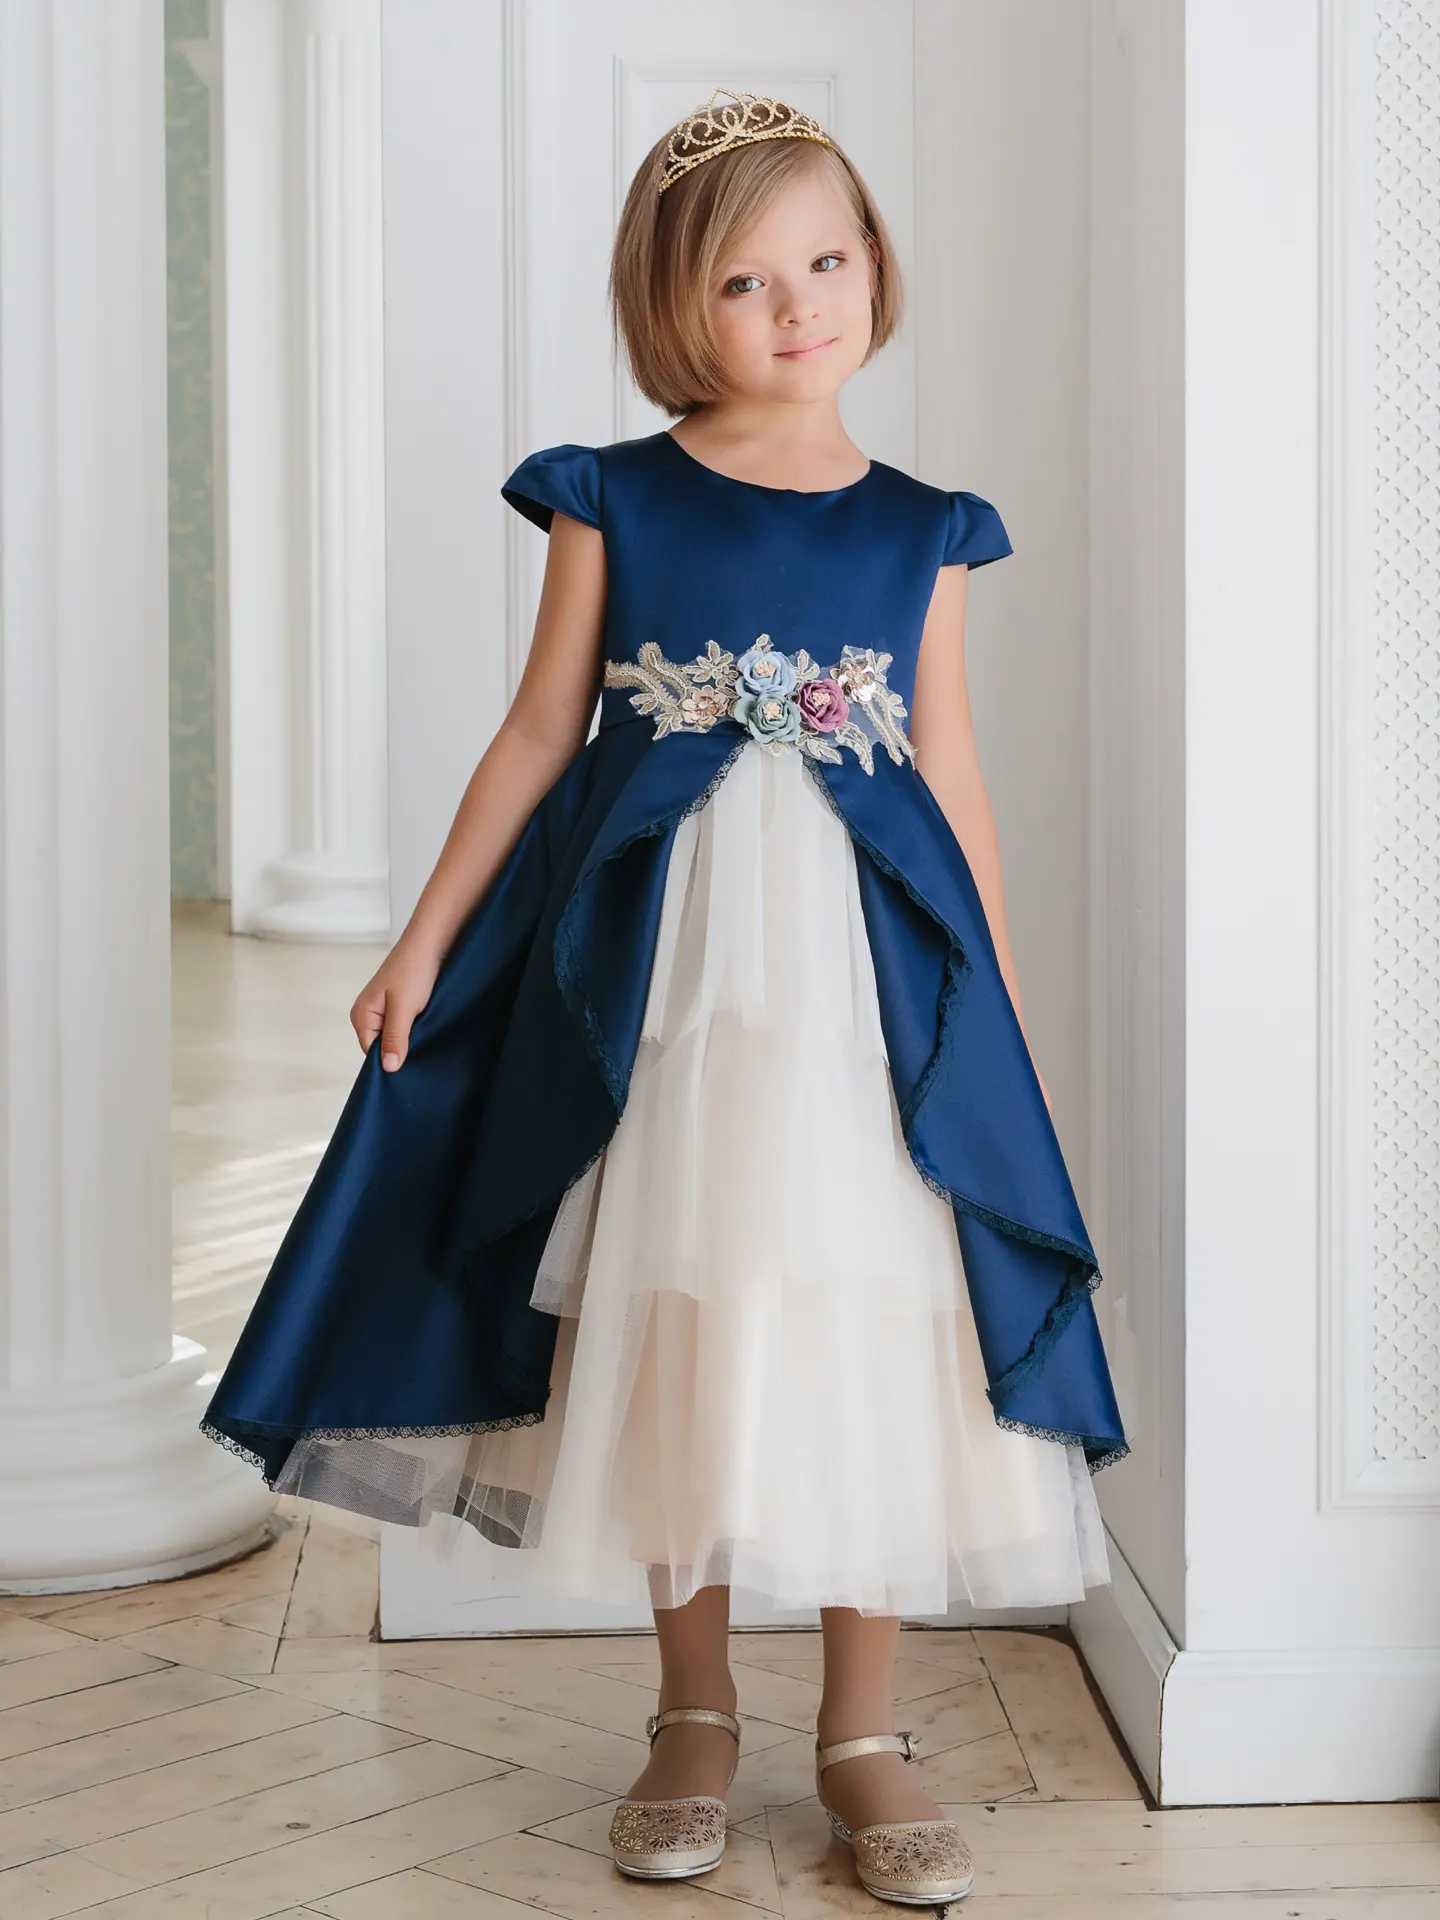 Chic draped solemn girl's dress with tiered skirt Disney Princess